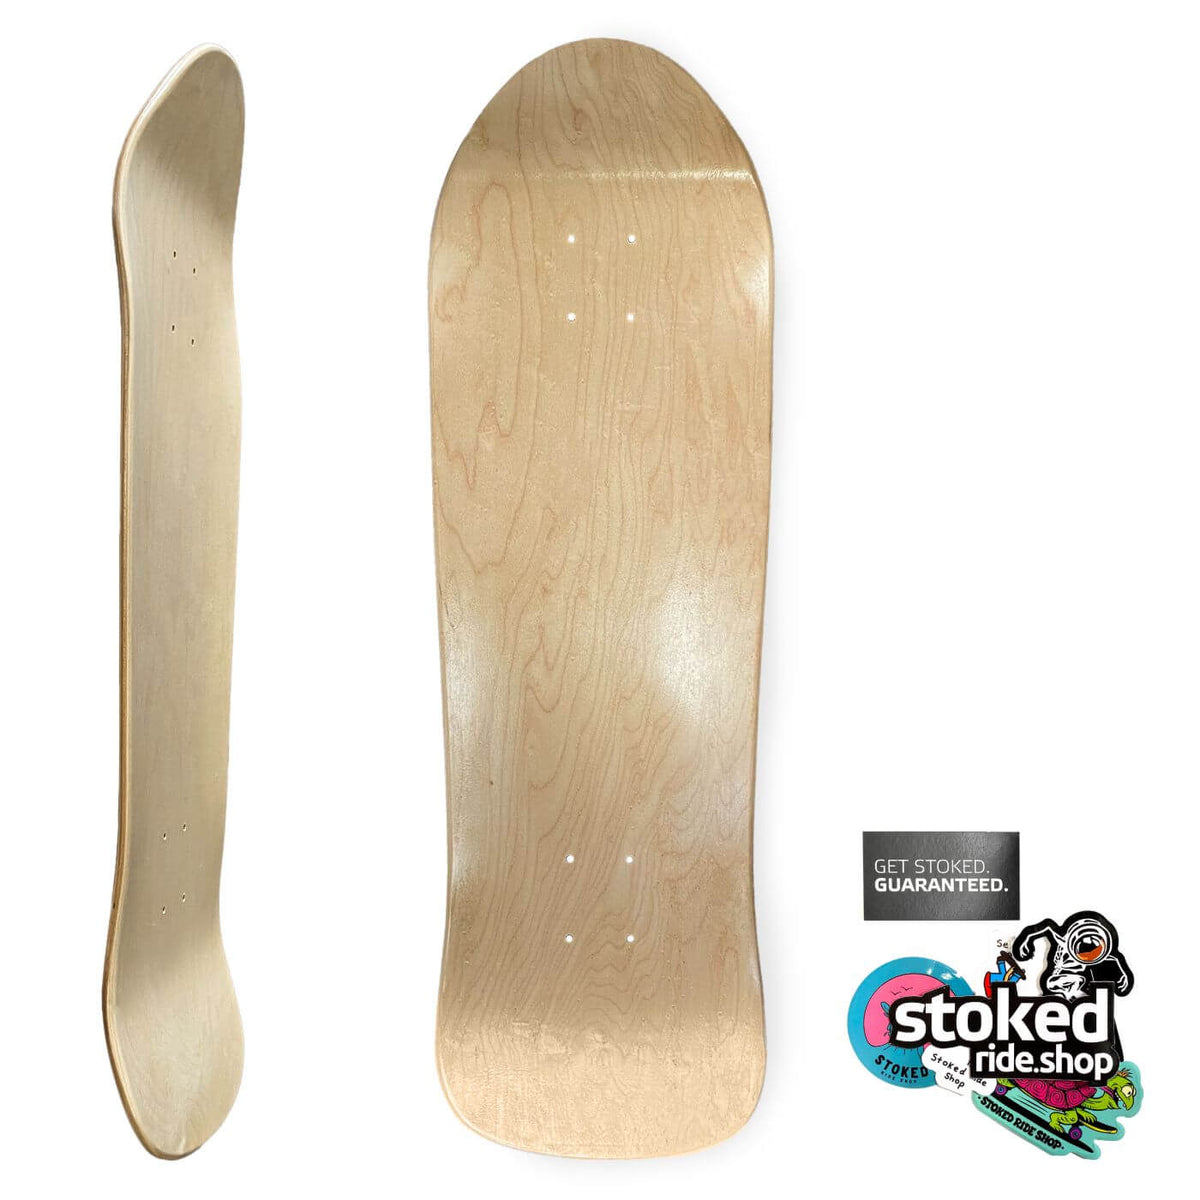 Stoked Ride Shop Old School Fishy Deck, 9.25"